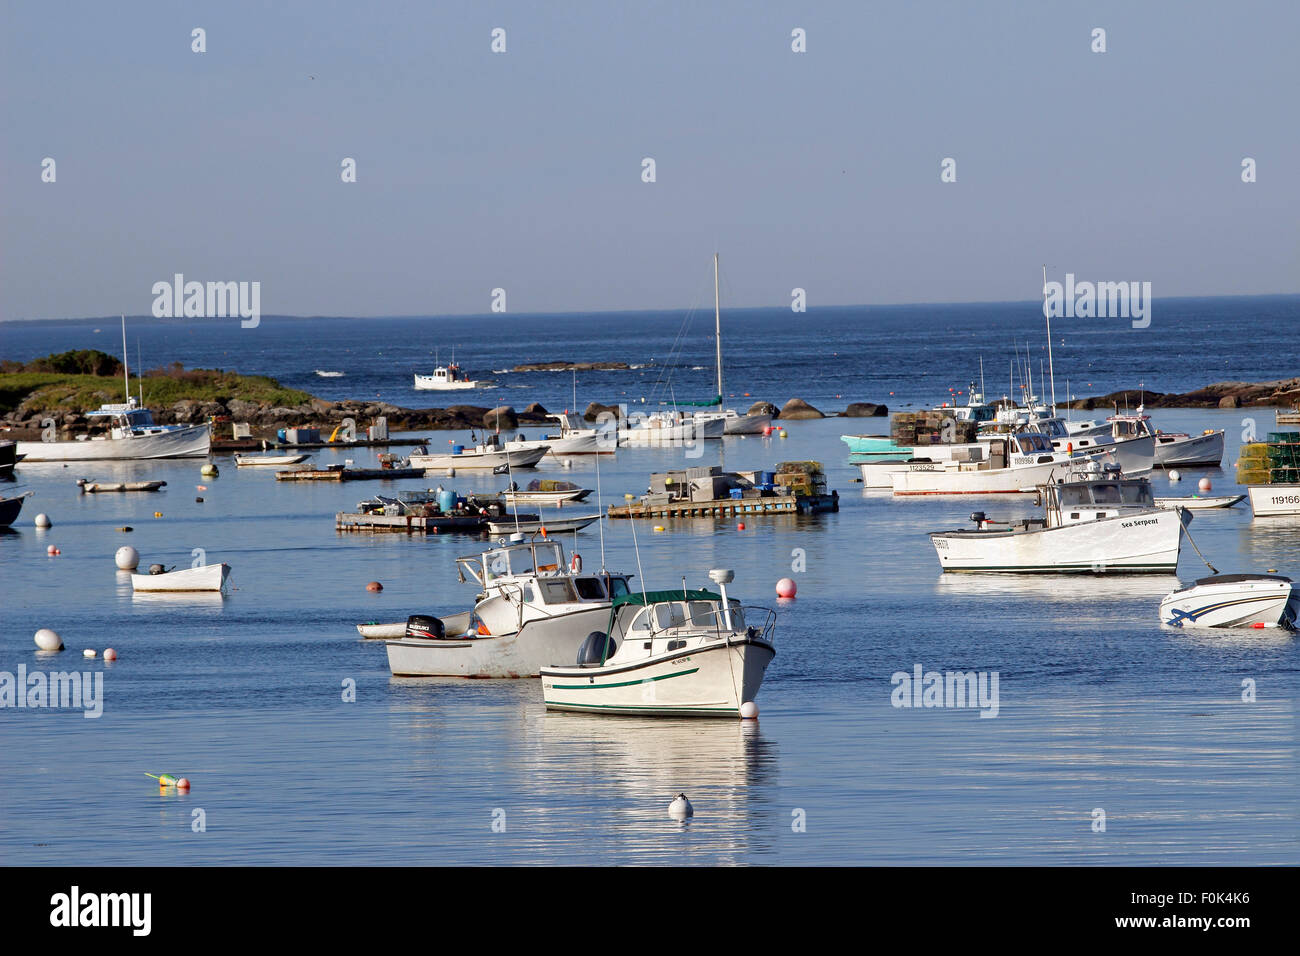 Lobster boats on moorings in harbor Vinalhaven Island Maine New England USA Stock Photo